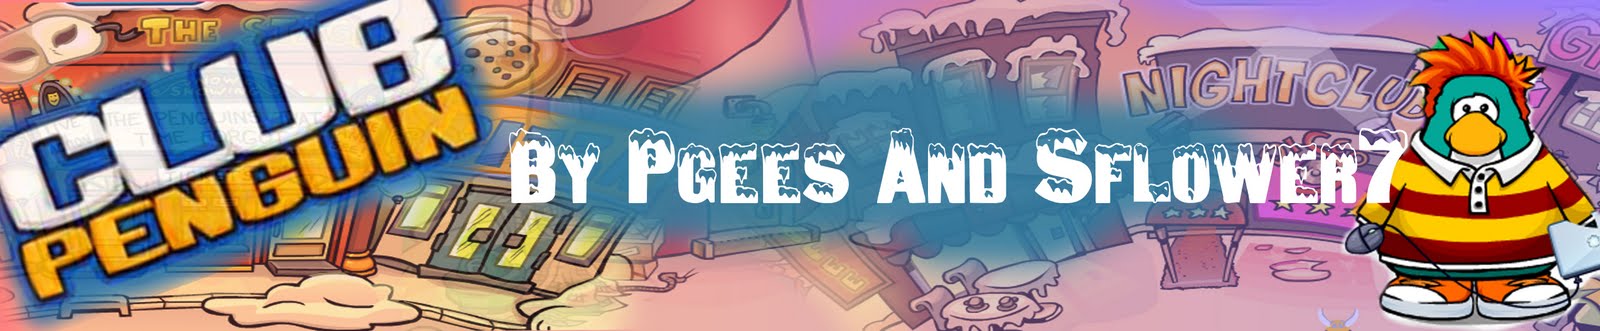 pgees games [ tgfg-bowling ]